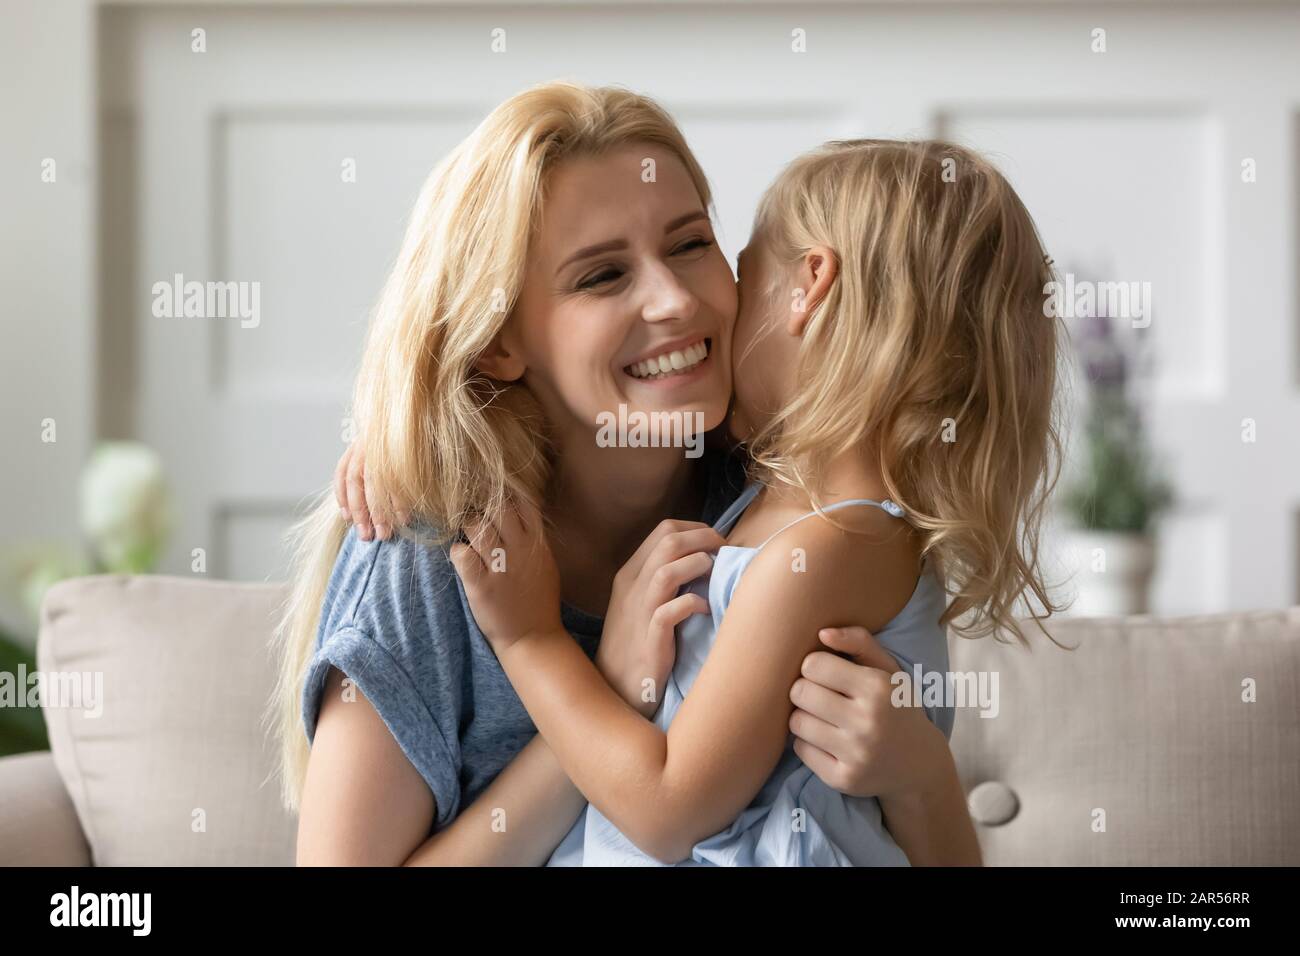 Joyful young mother playing with small daughter. Stock Photo